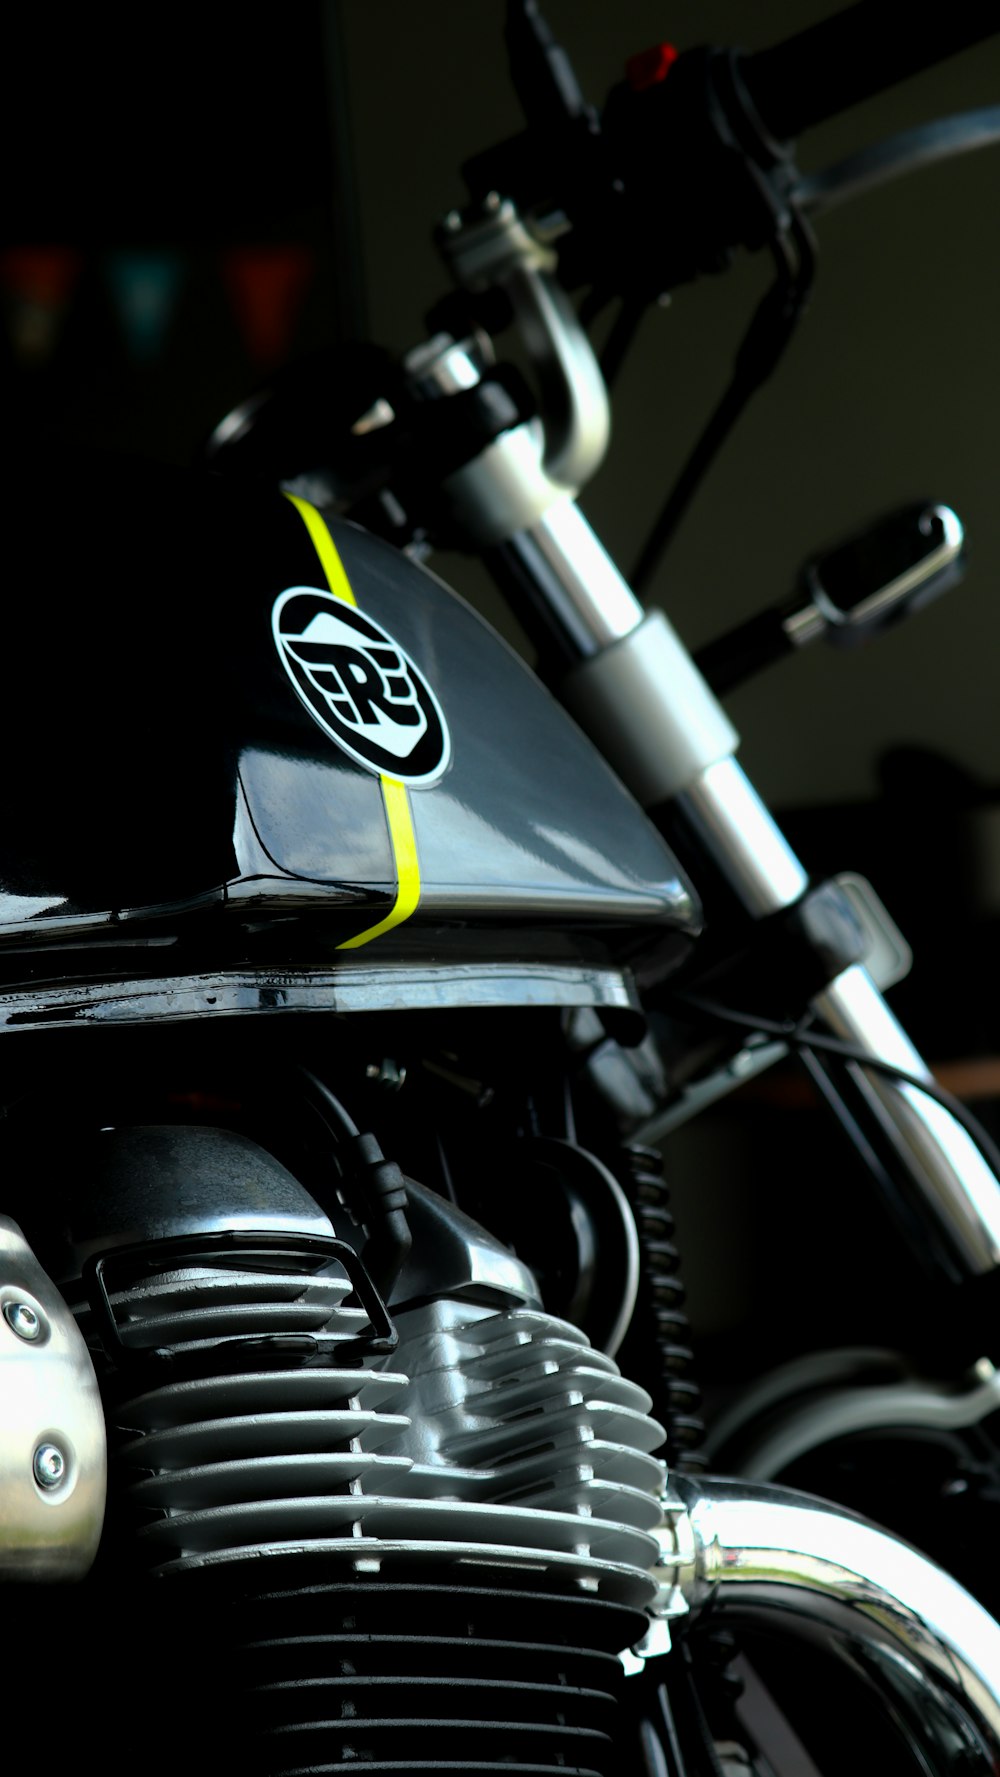 a close up of a motorcycle parked in a room